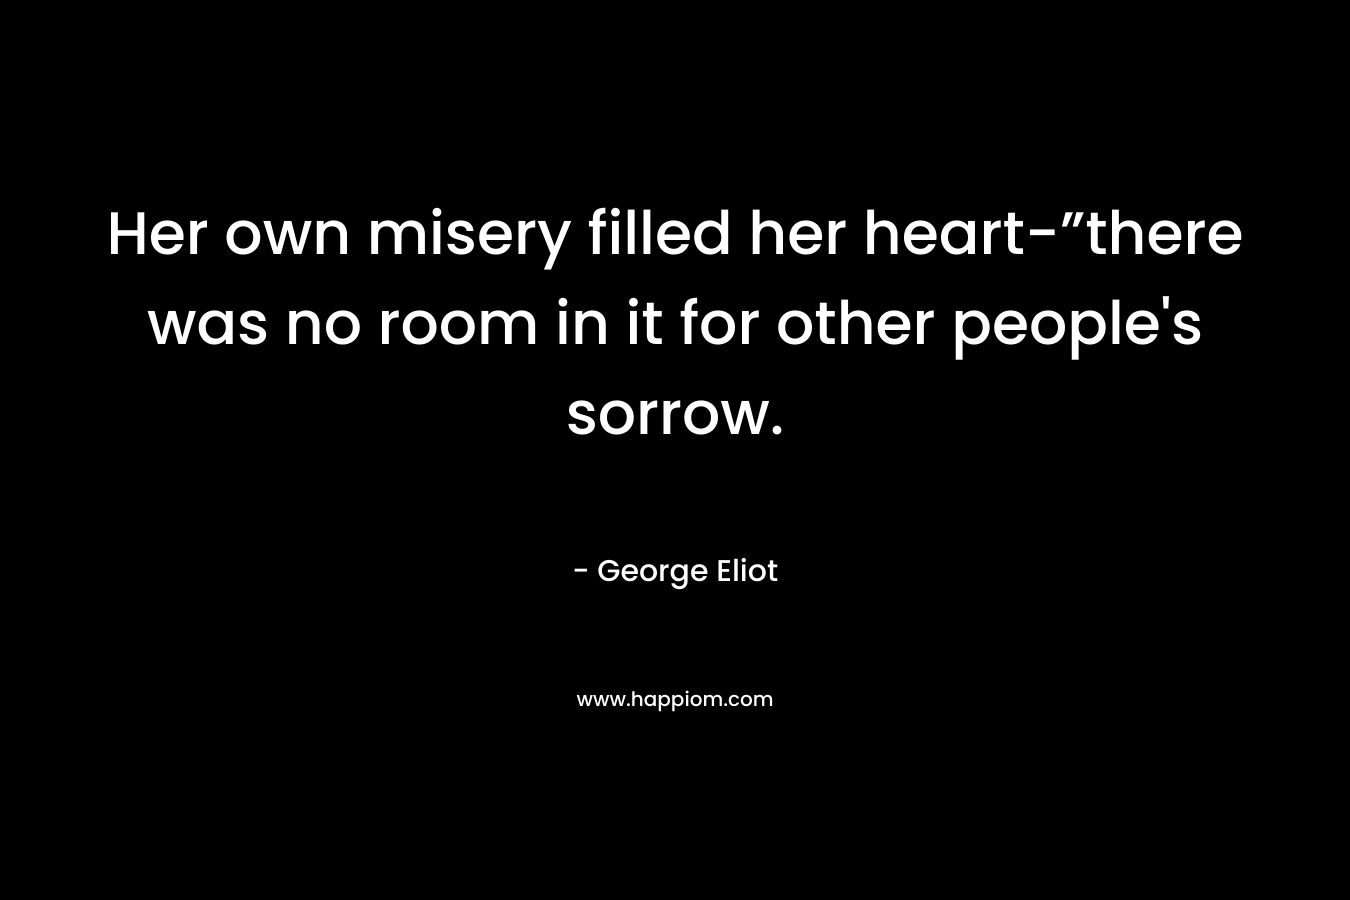 Her own misery filled her heart-”there was no room in it for other people's sorrow.